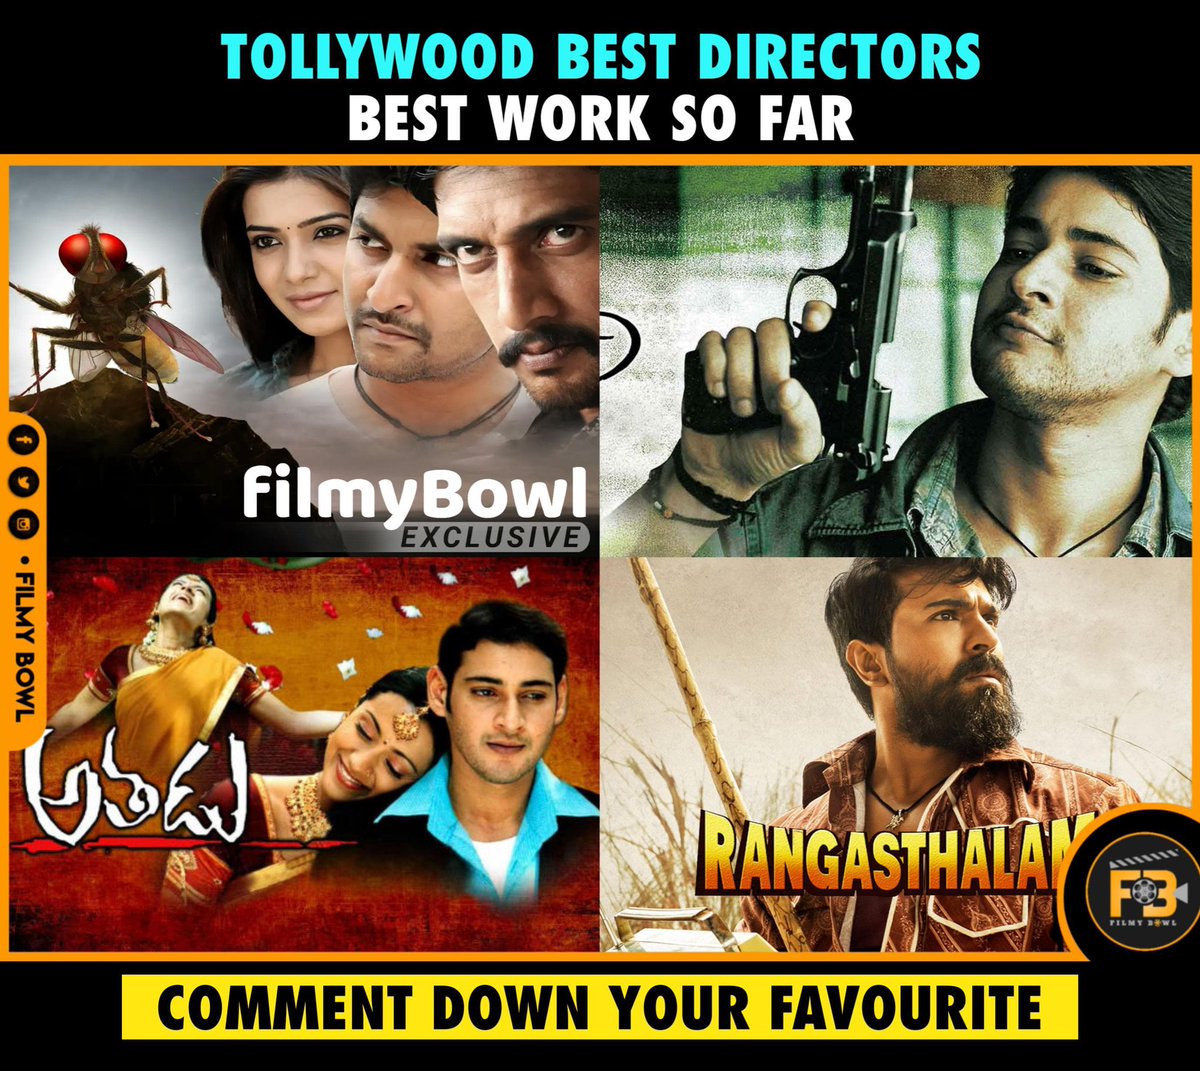 Tollywood Best Directors best work so Far.

Comment down your favorite 👇👇